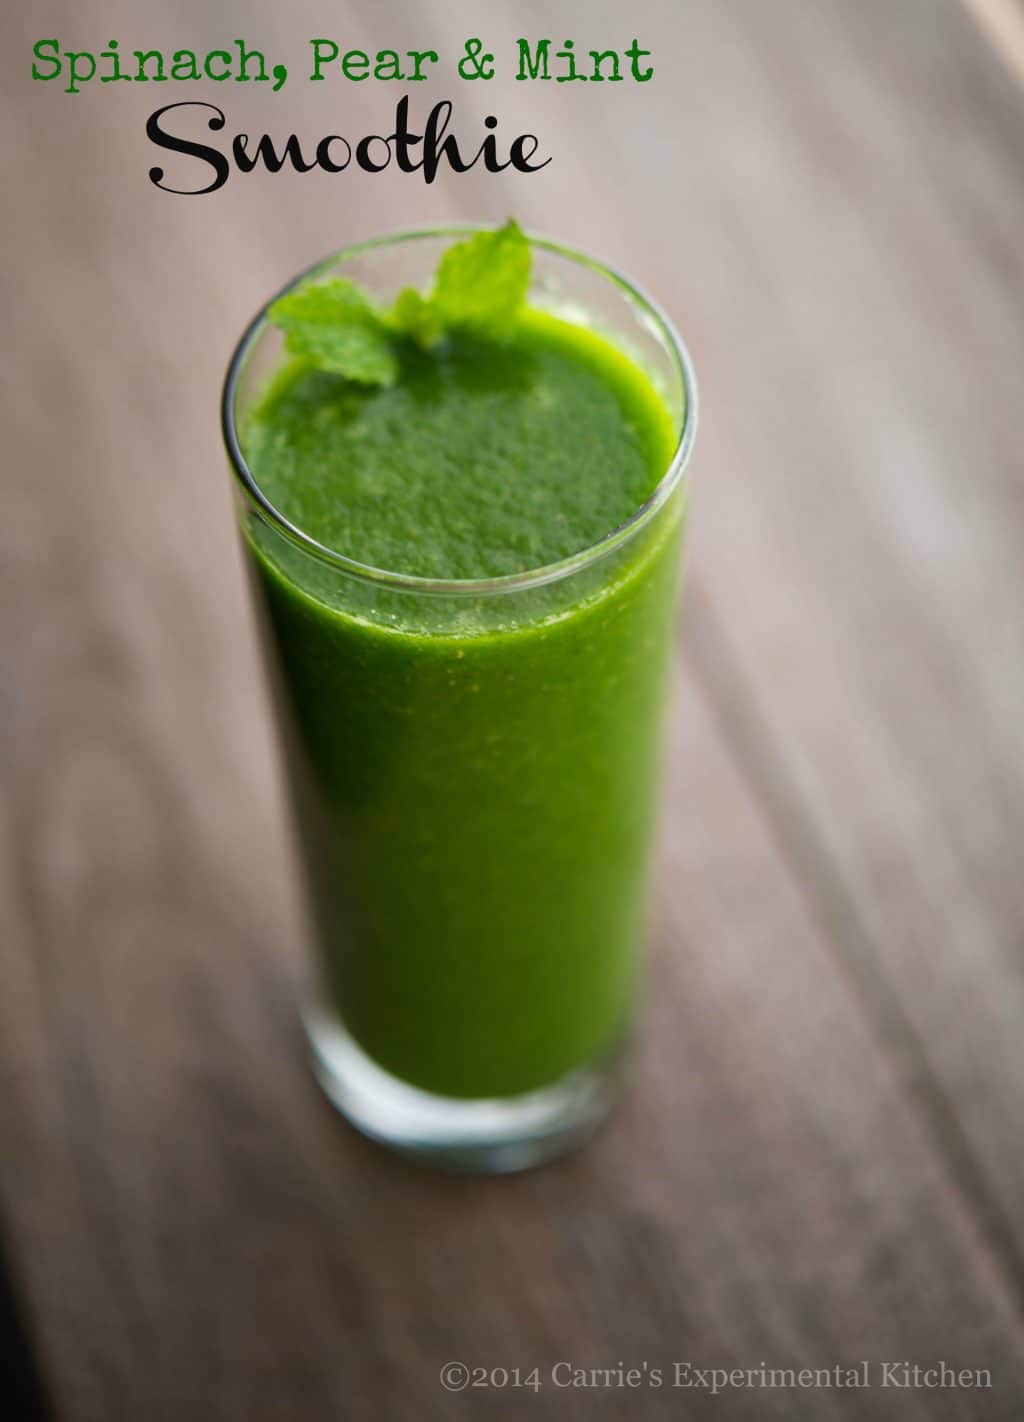 Spinach Pear & Mint Smoothie